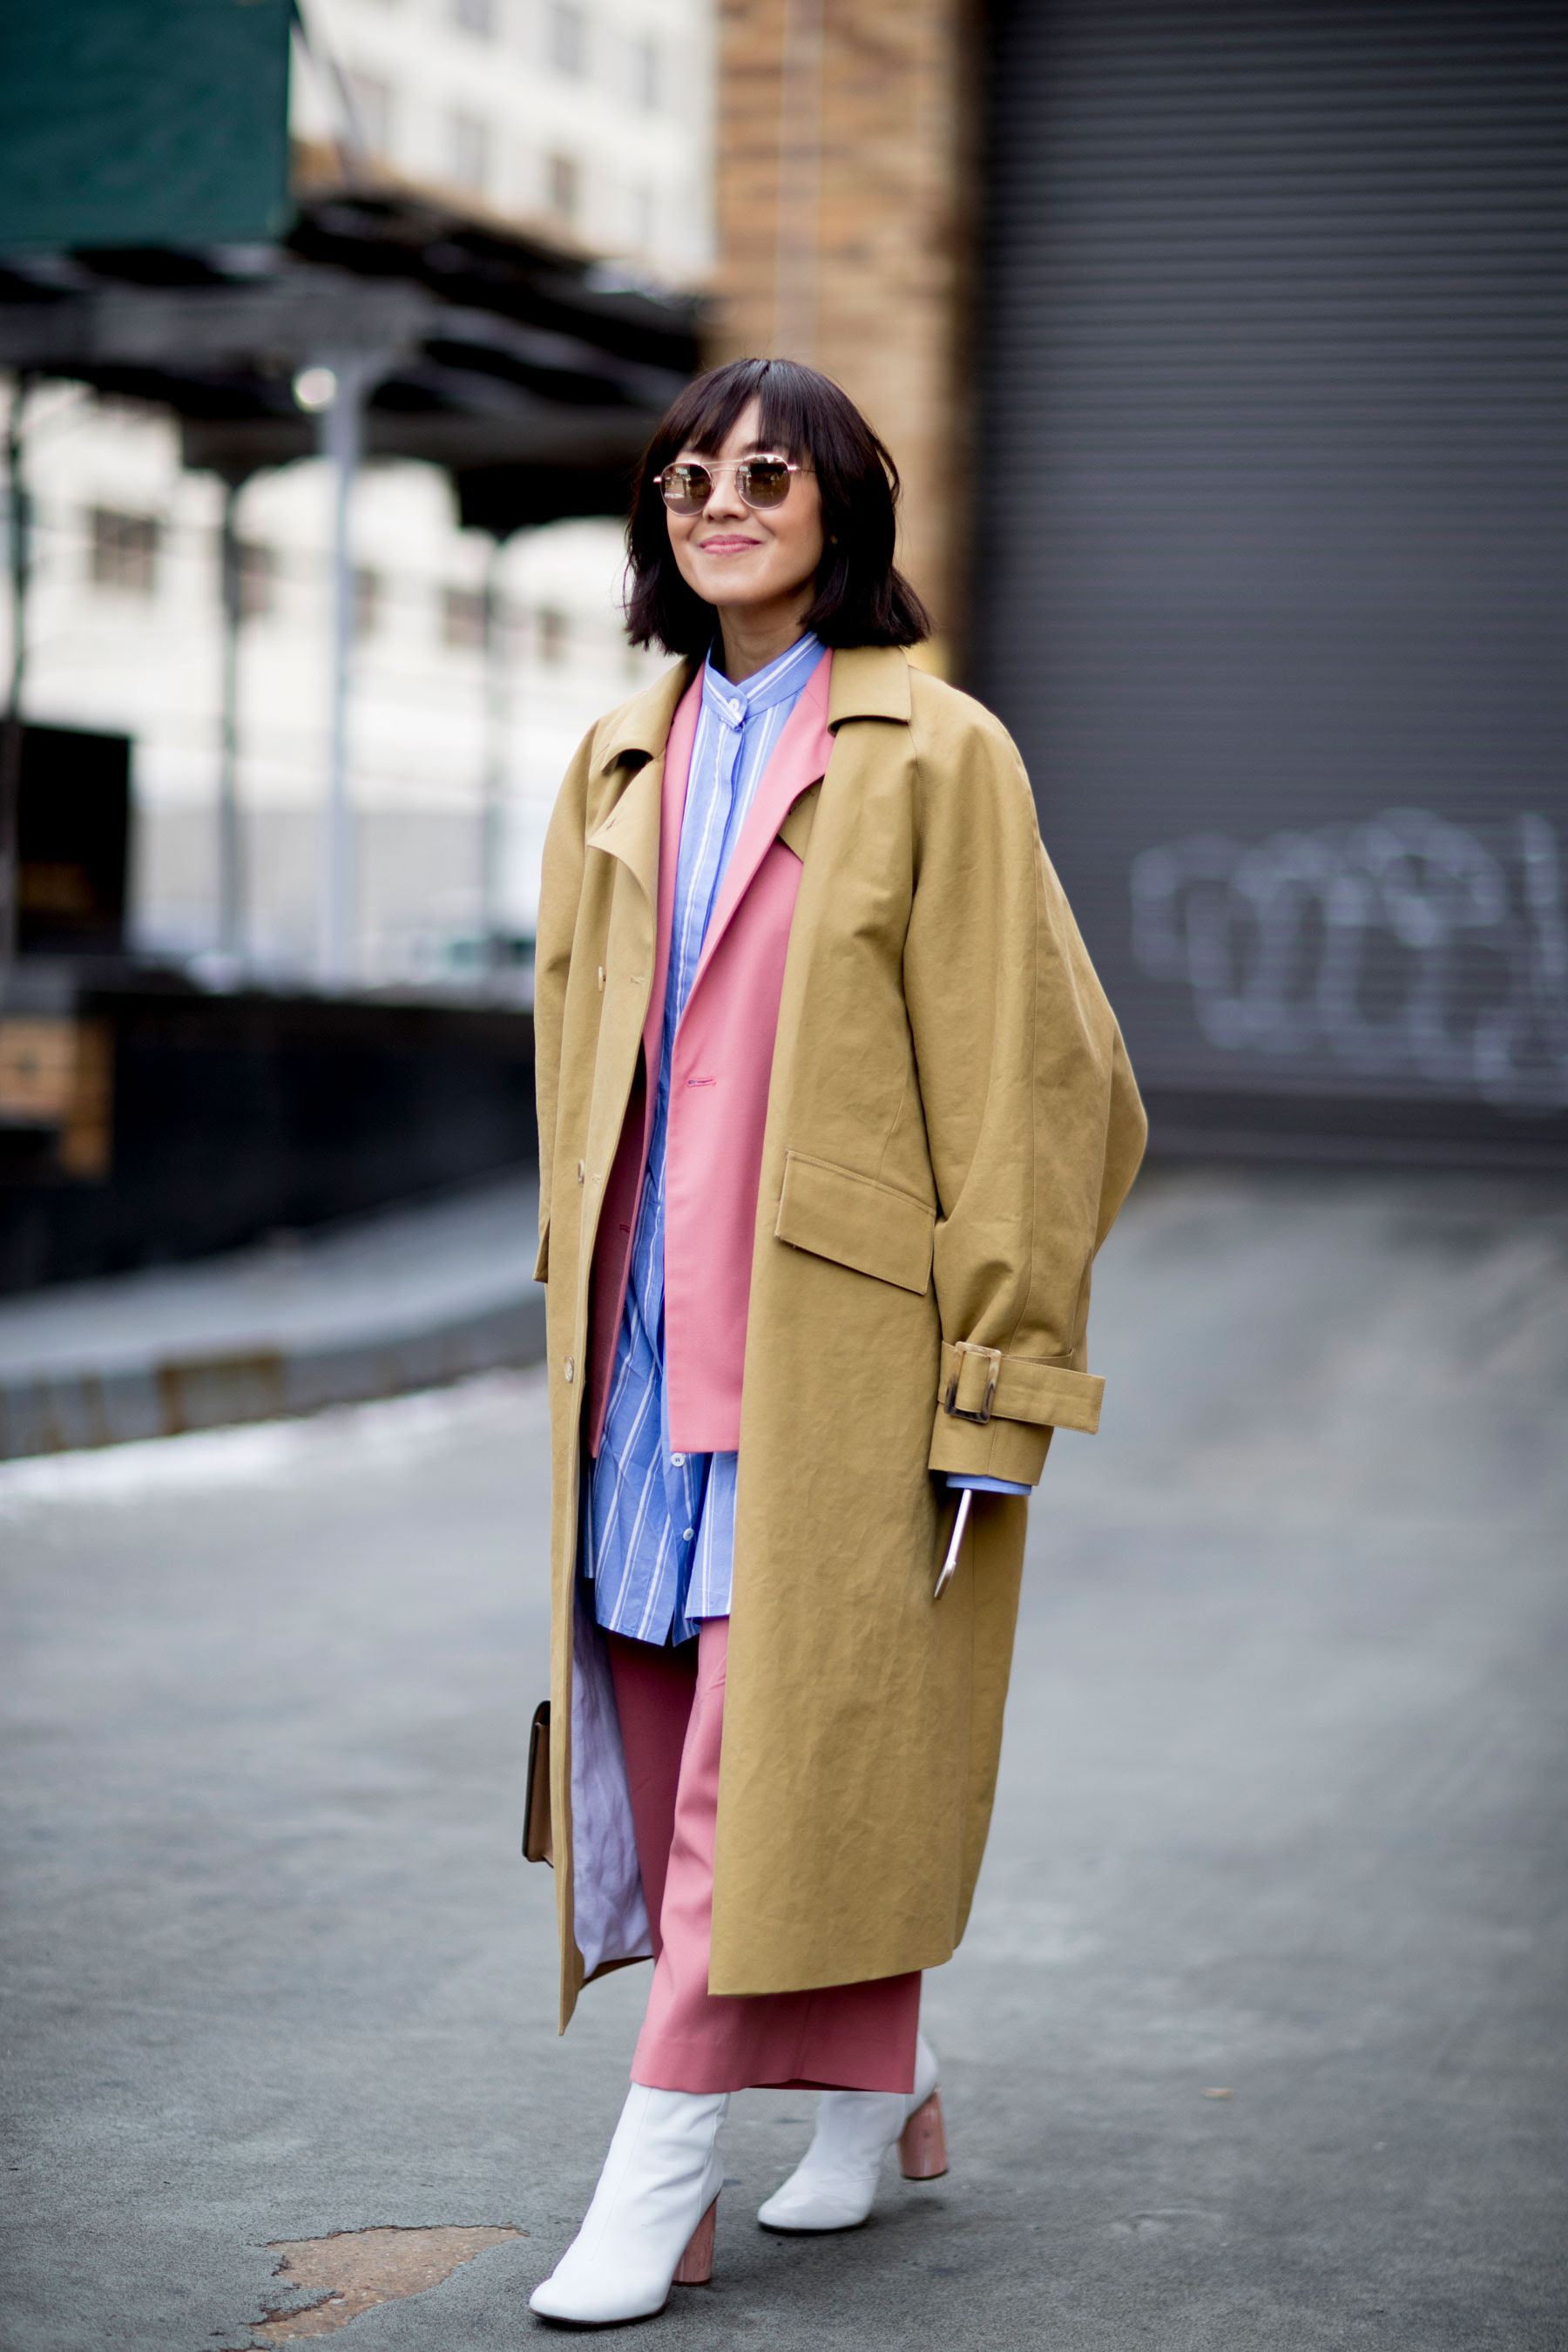 Street Style at New York Fashion Week Fall Winter 2017-2018: Part 3 ...